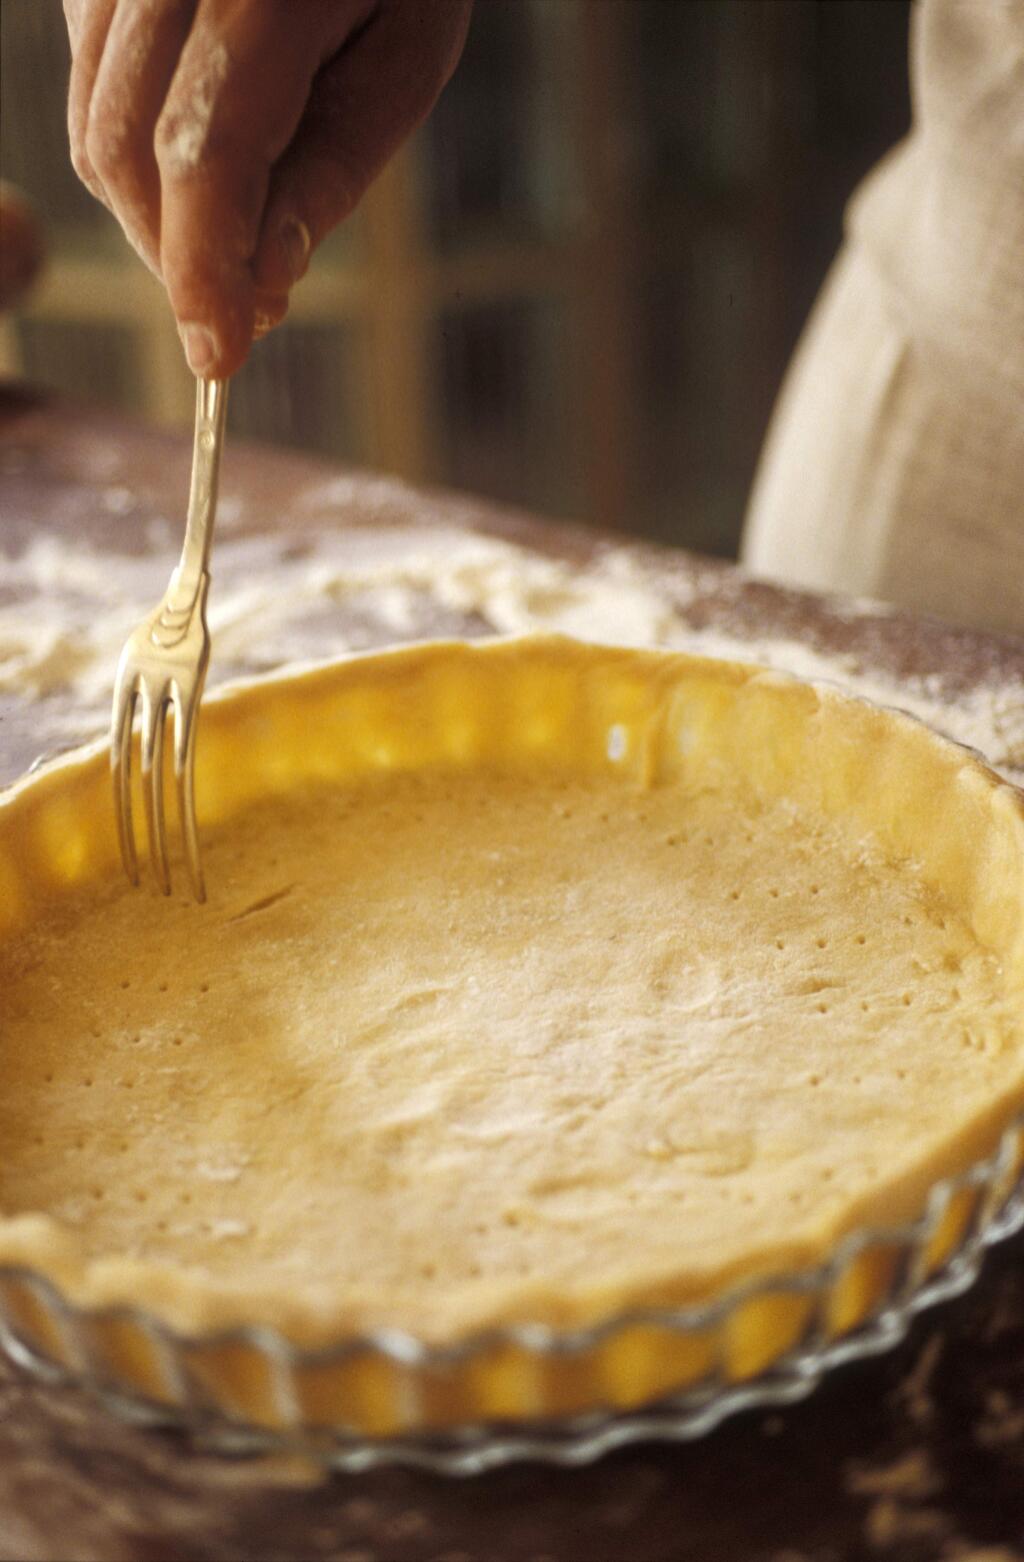 Shortcrust pastry (pâte brisée) is a type of pastry often used for the base of a tart, quiche or pie. (Foodpictures)